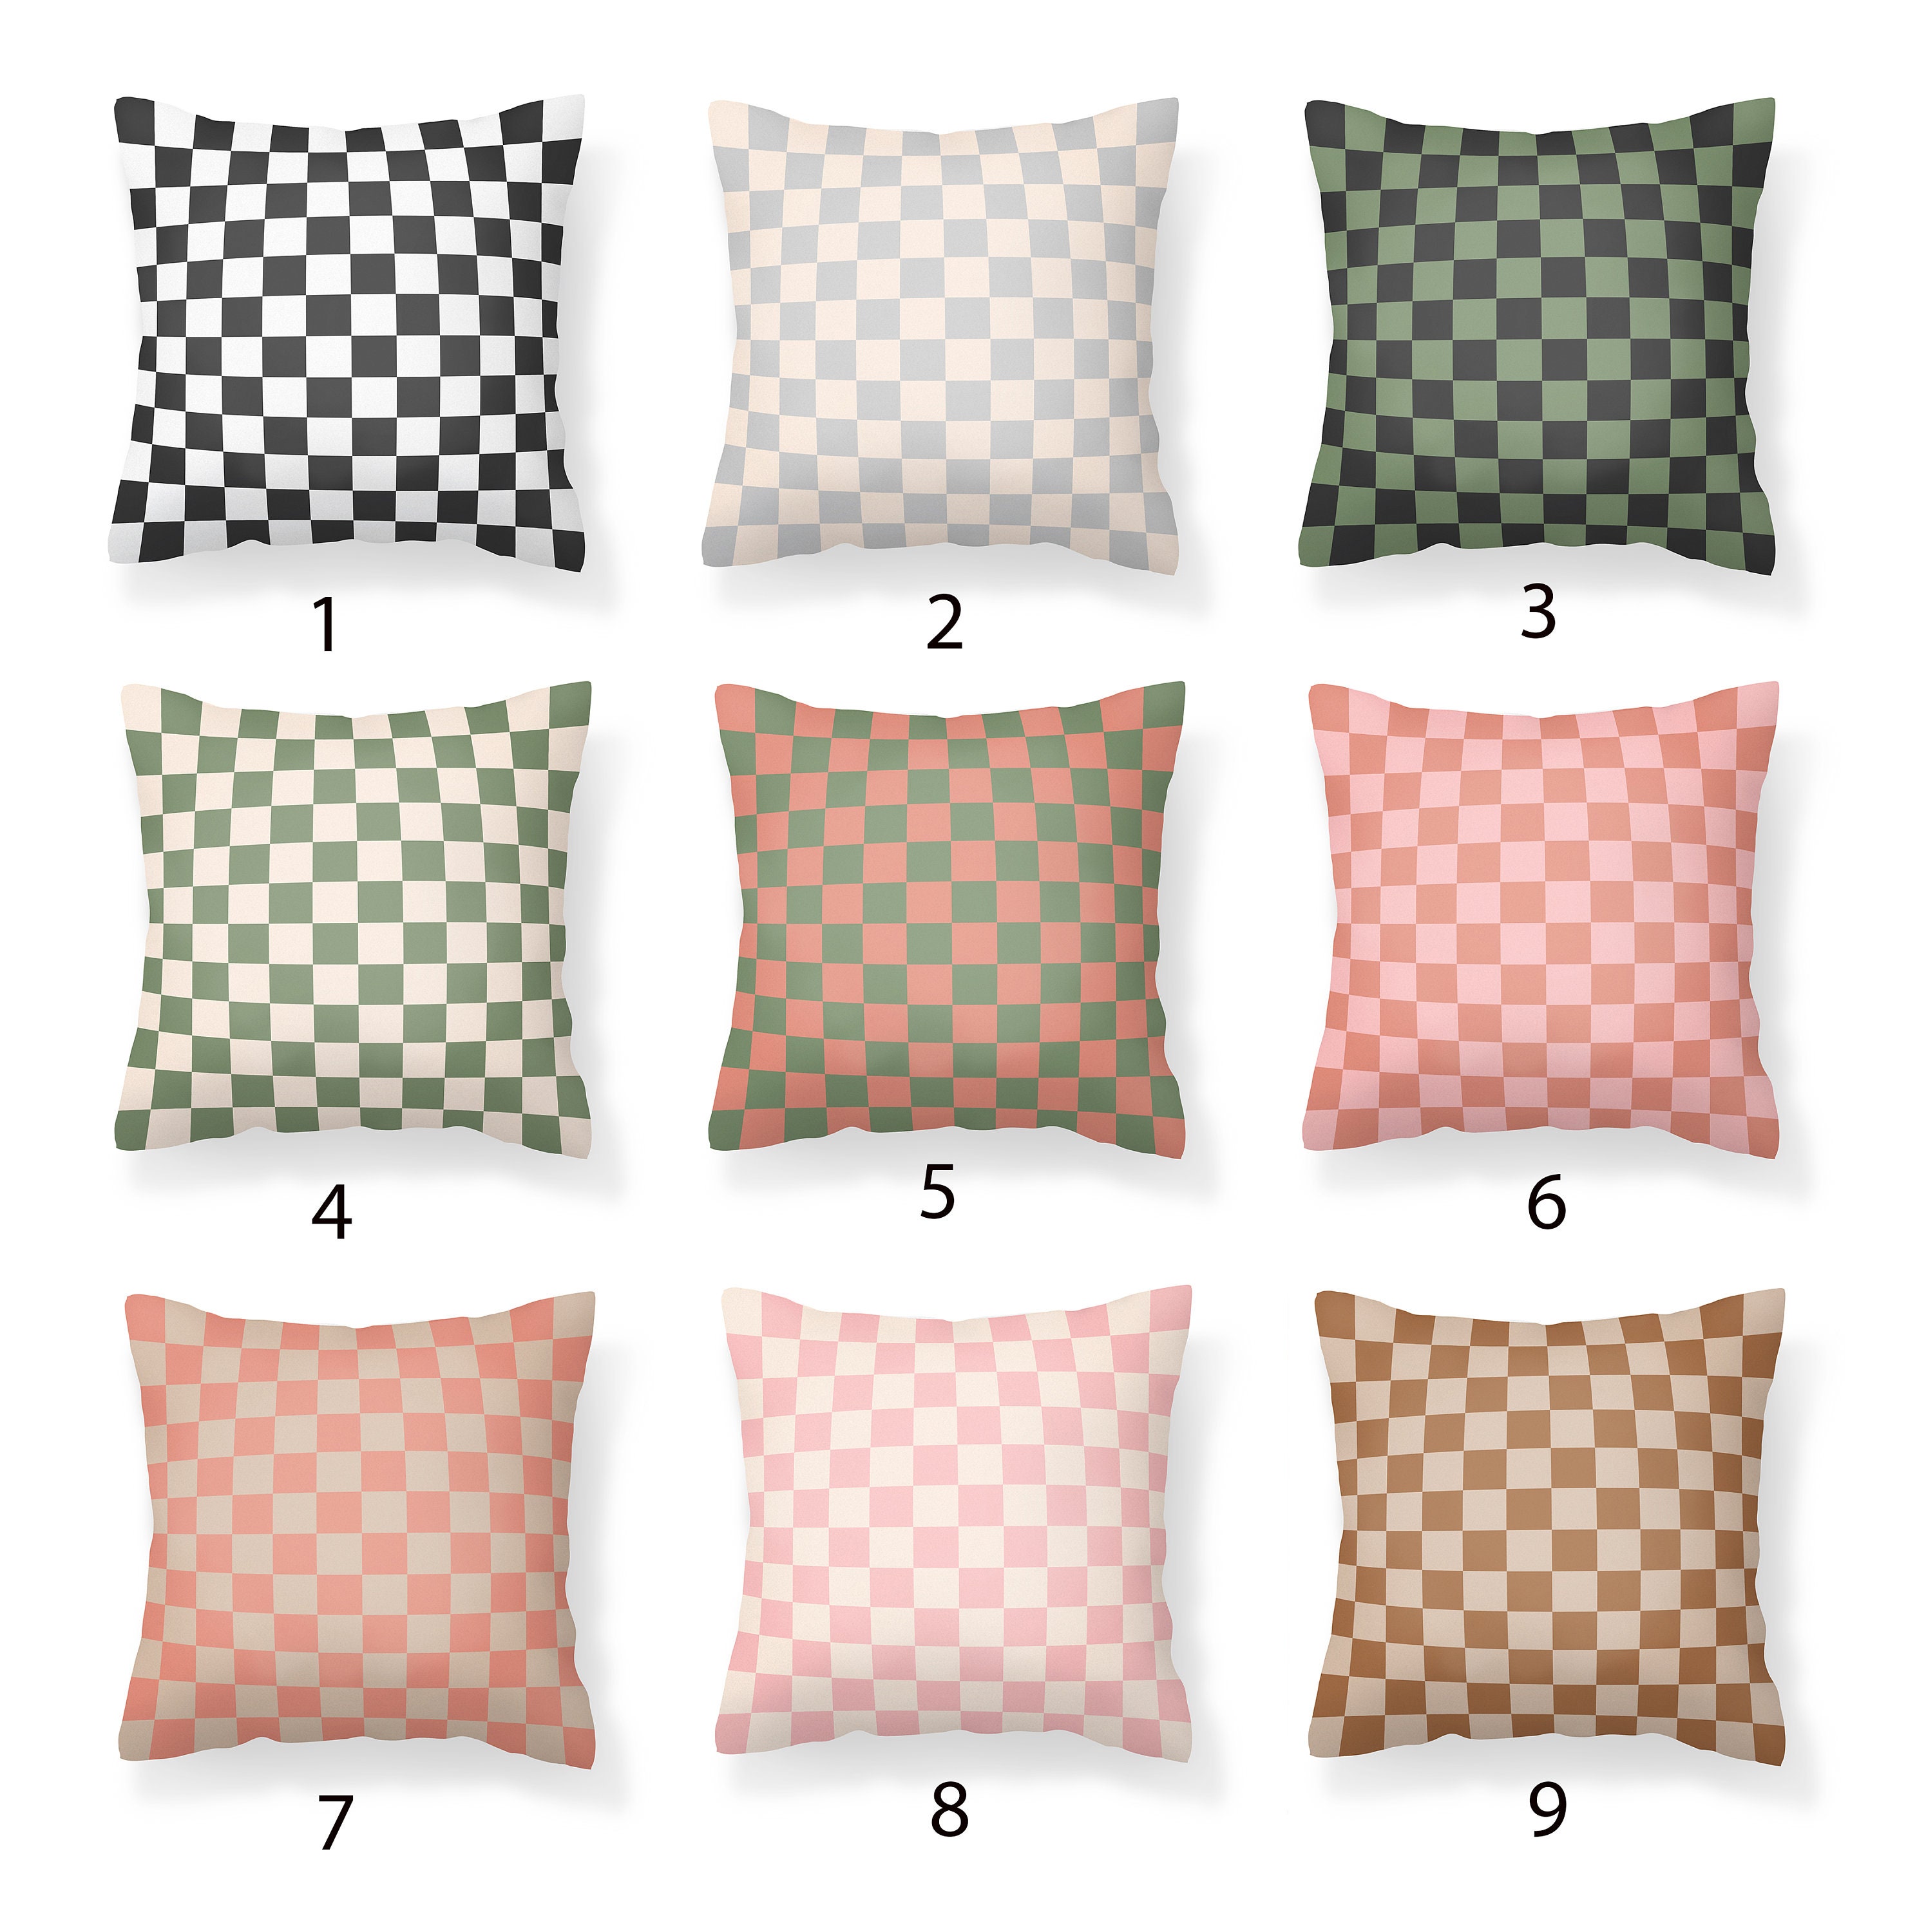 Louis Vuitton Pillow Case Price Luxembourg, SAVE 48% 